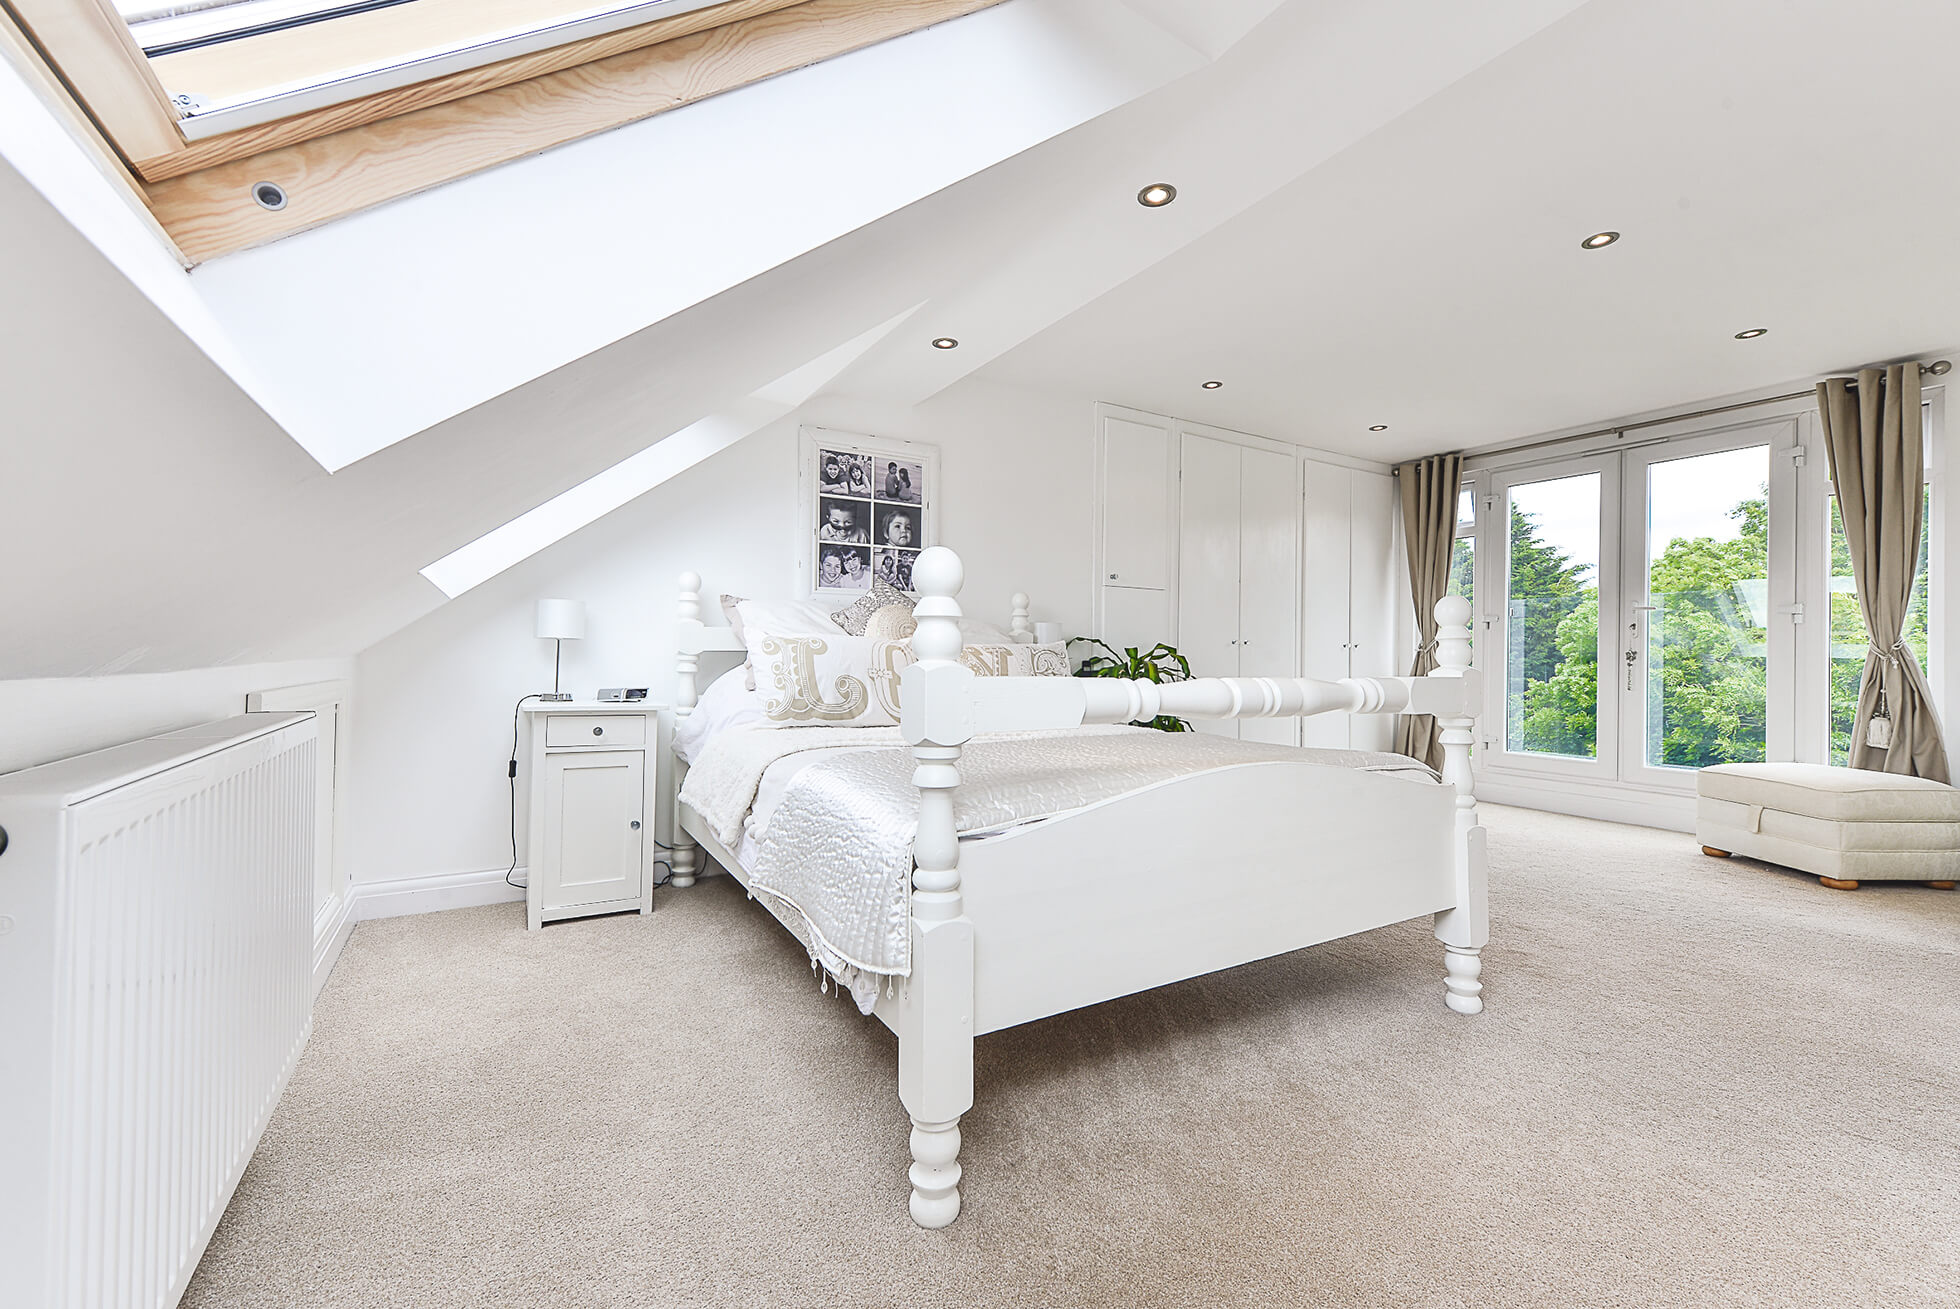 Do you have a question about converting your Loft in Offley? Here are the most popular questions asked by our clients.